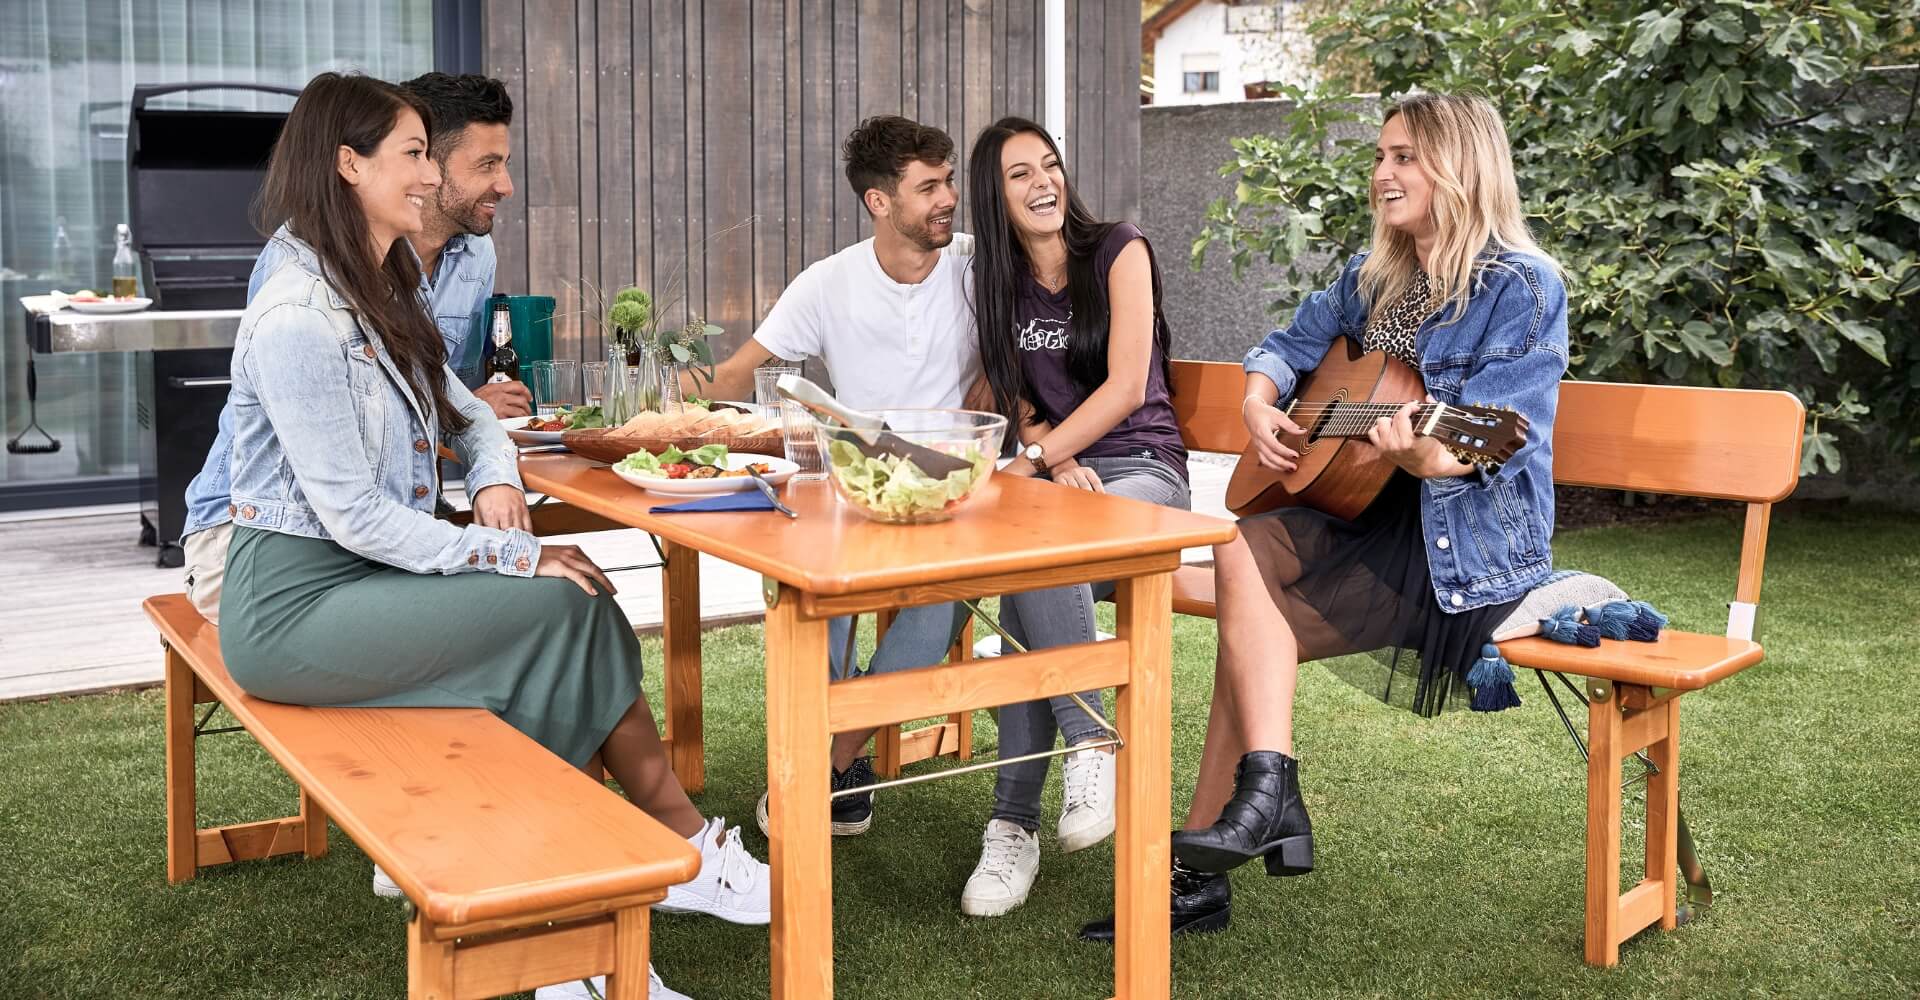 Four people enjoying the music played by a woman on a guitar sitting on the design set Rustica in the garden.